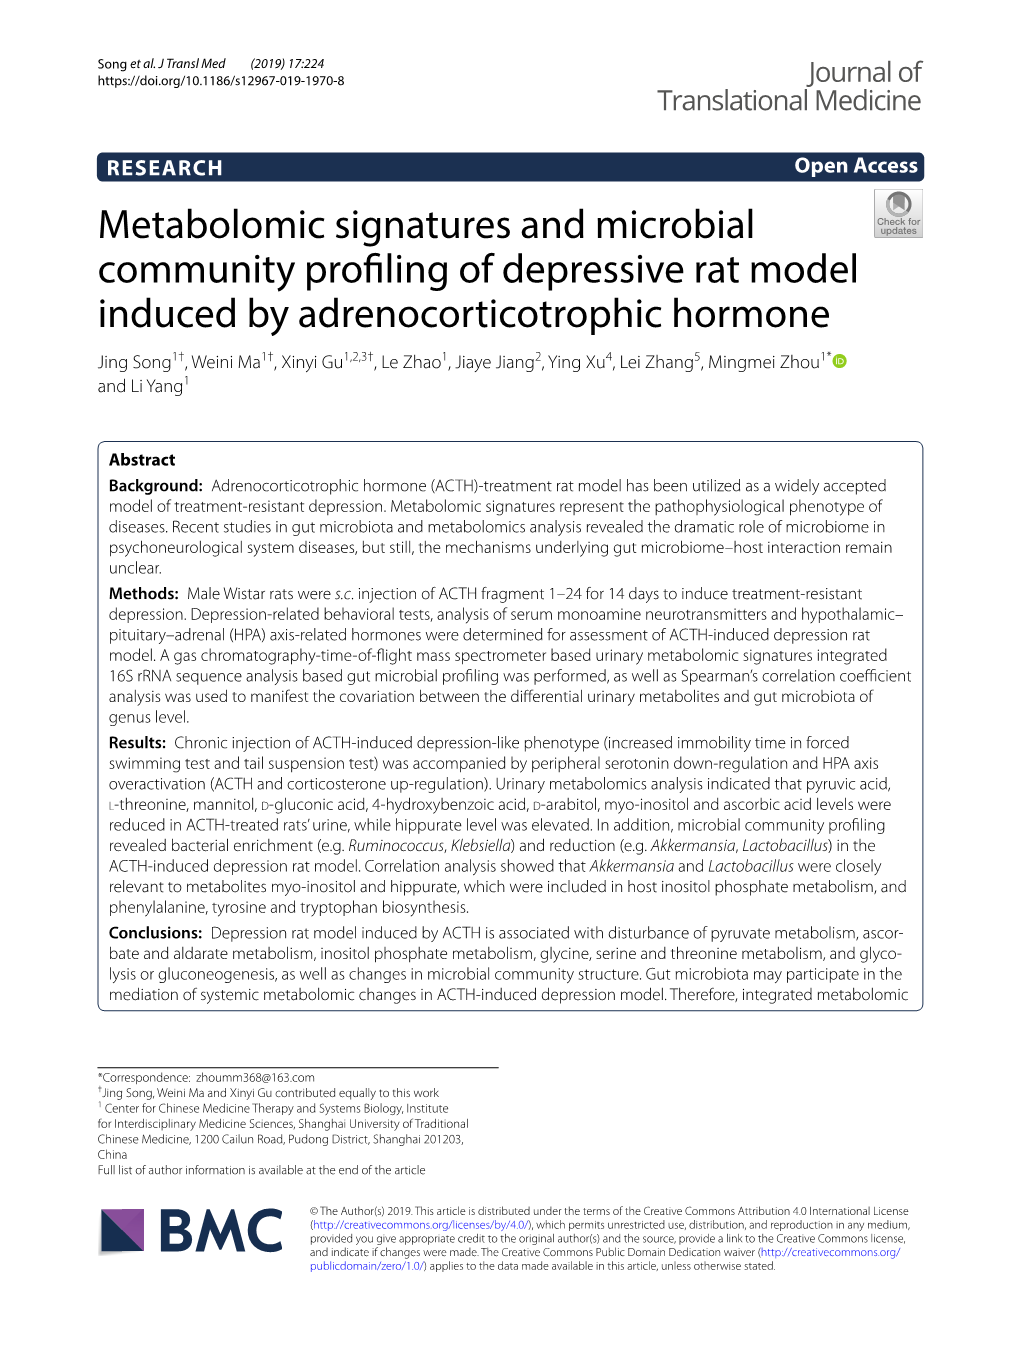 Metabolomic Signatures and Microbial Community Profiling of Depressive